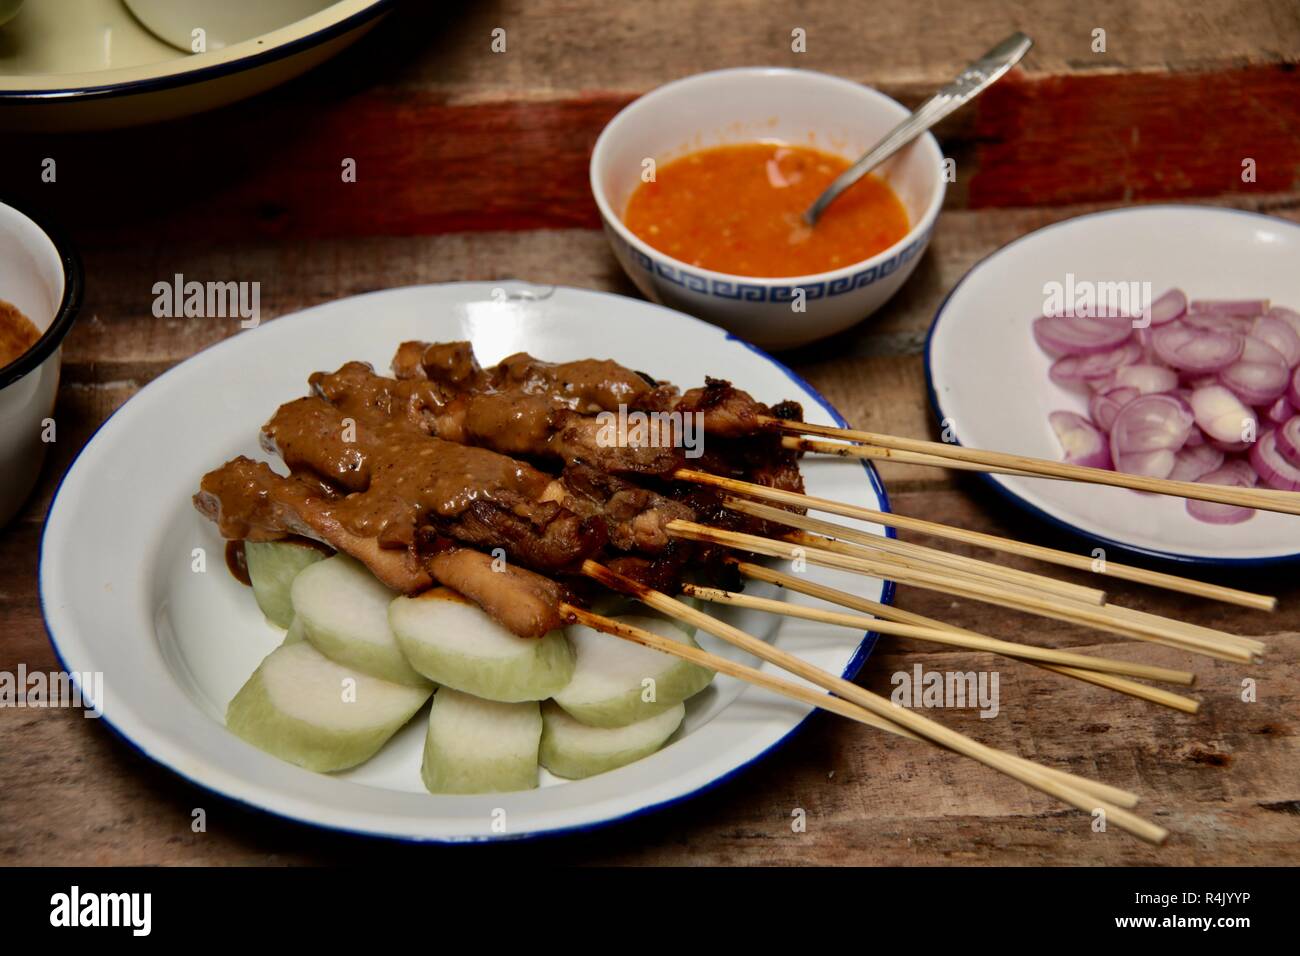 Sate Ponorogo. Traditional chicken satay from Ponorogo, East Java. Stock Photo